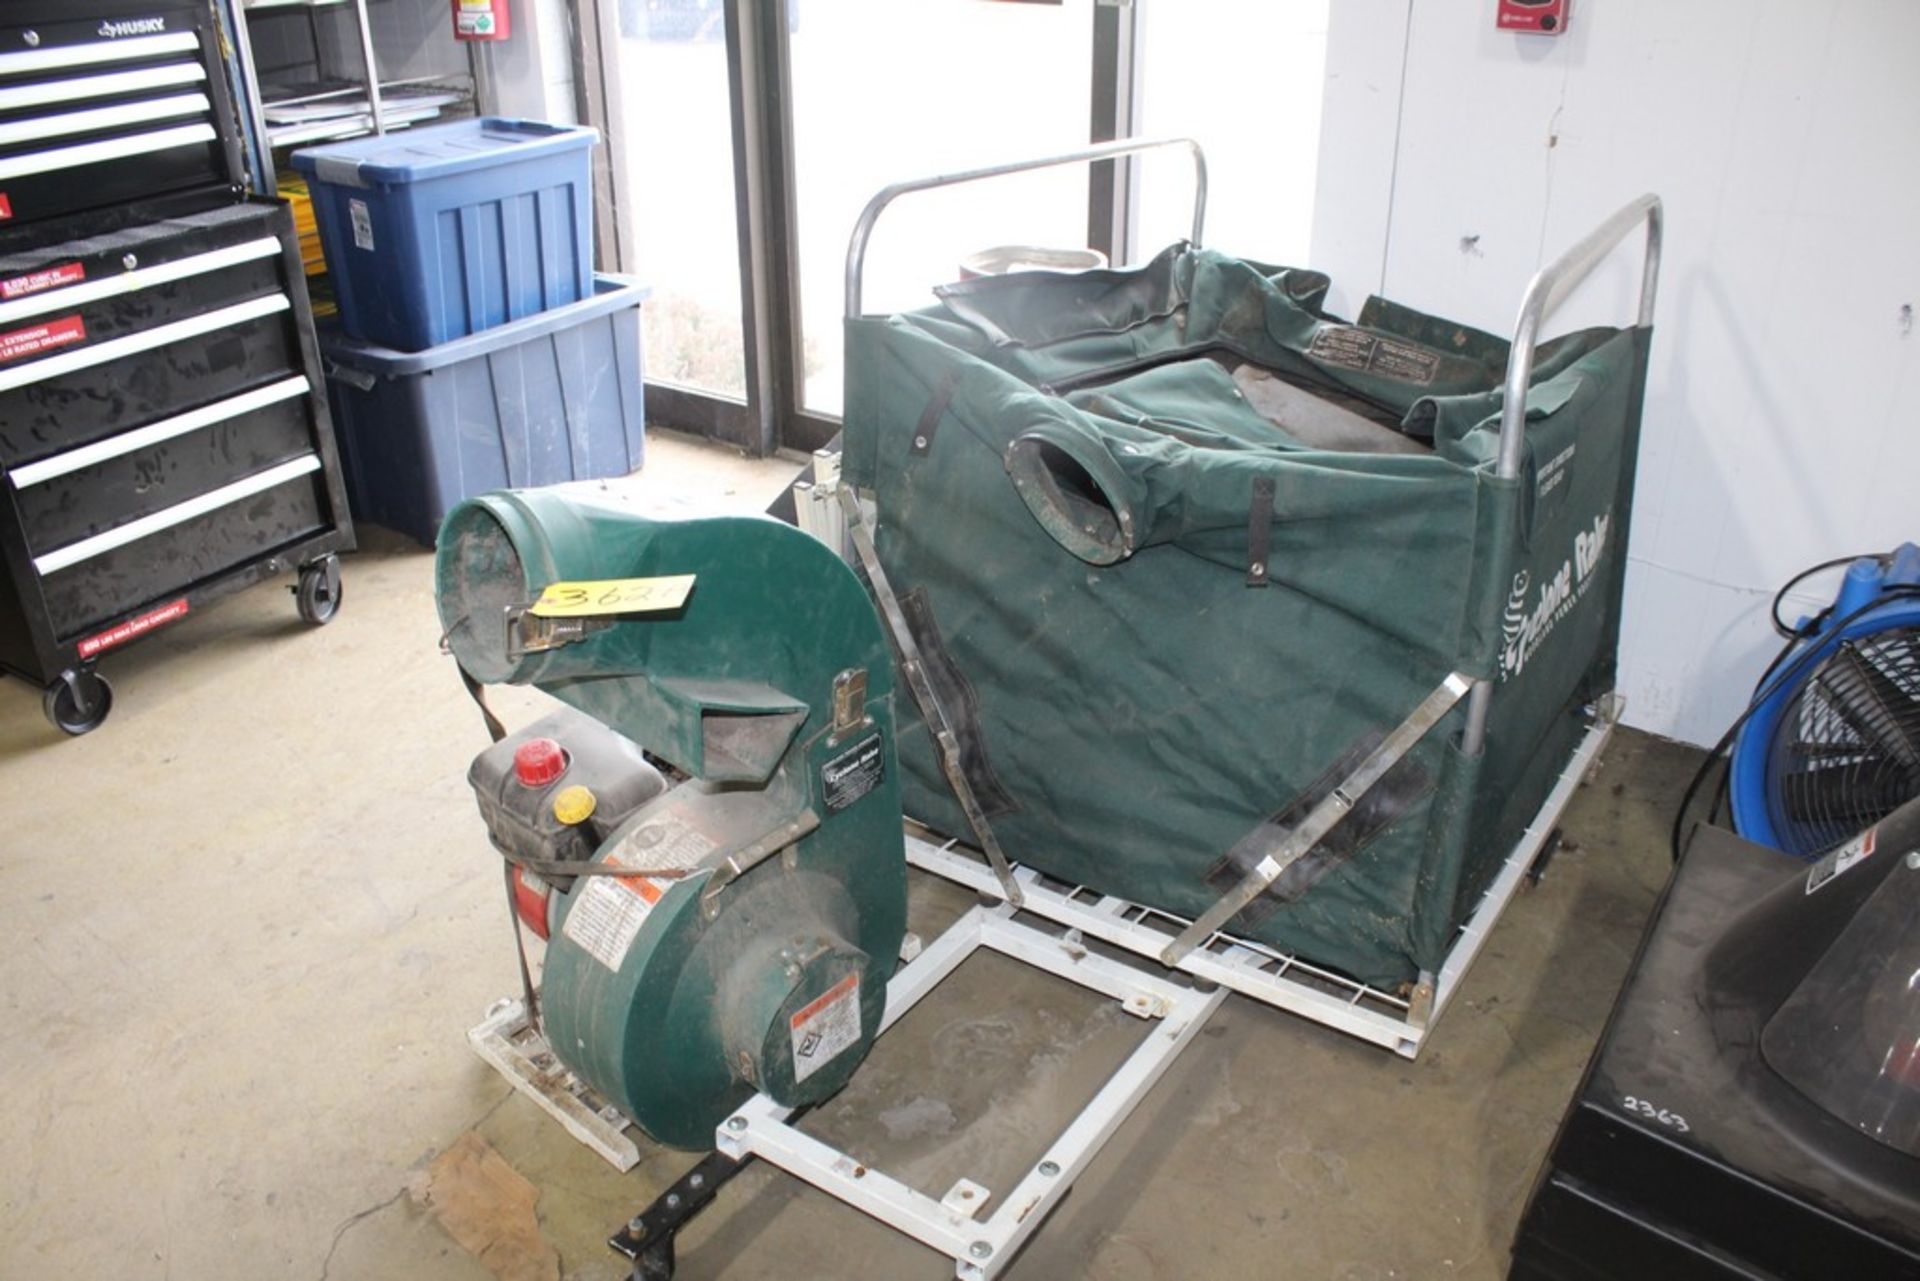 WOODLAND POWER "CYLCONE RAKE" LEAF COLLECTOR SYSTEM, WITH TECUMSEH 5.0HP GAS POWERED BLOWER AND